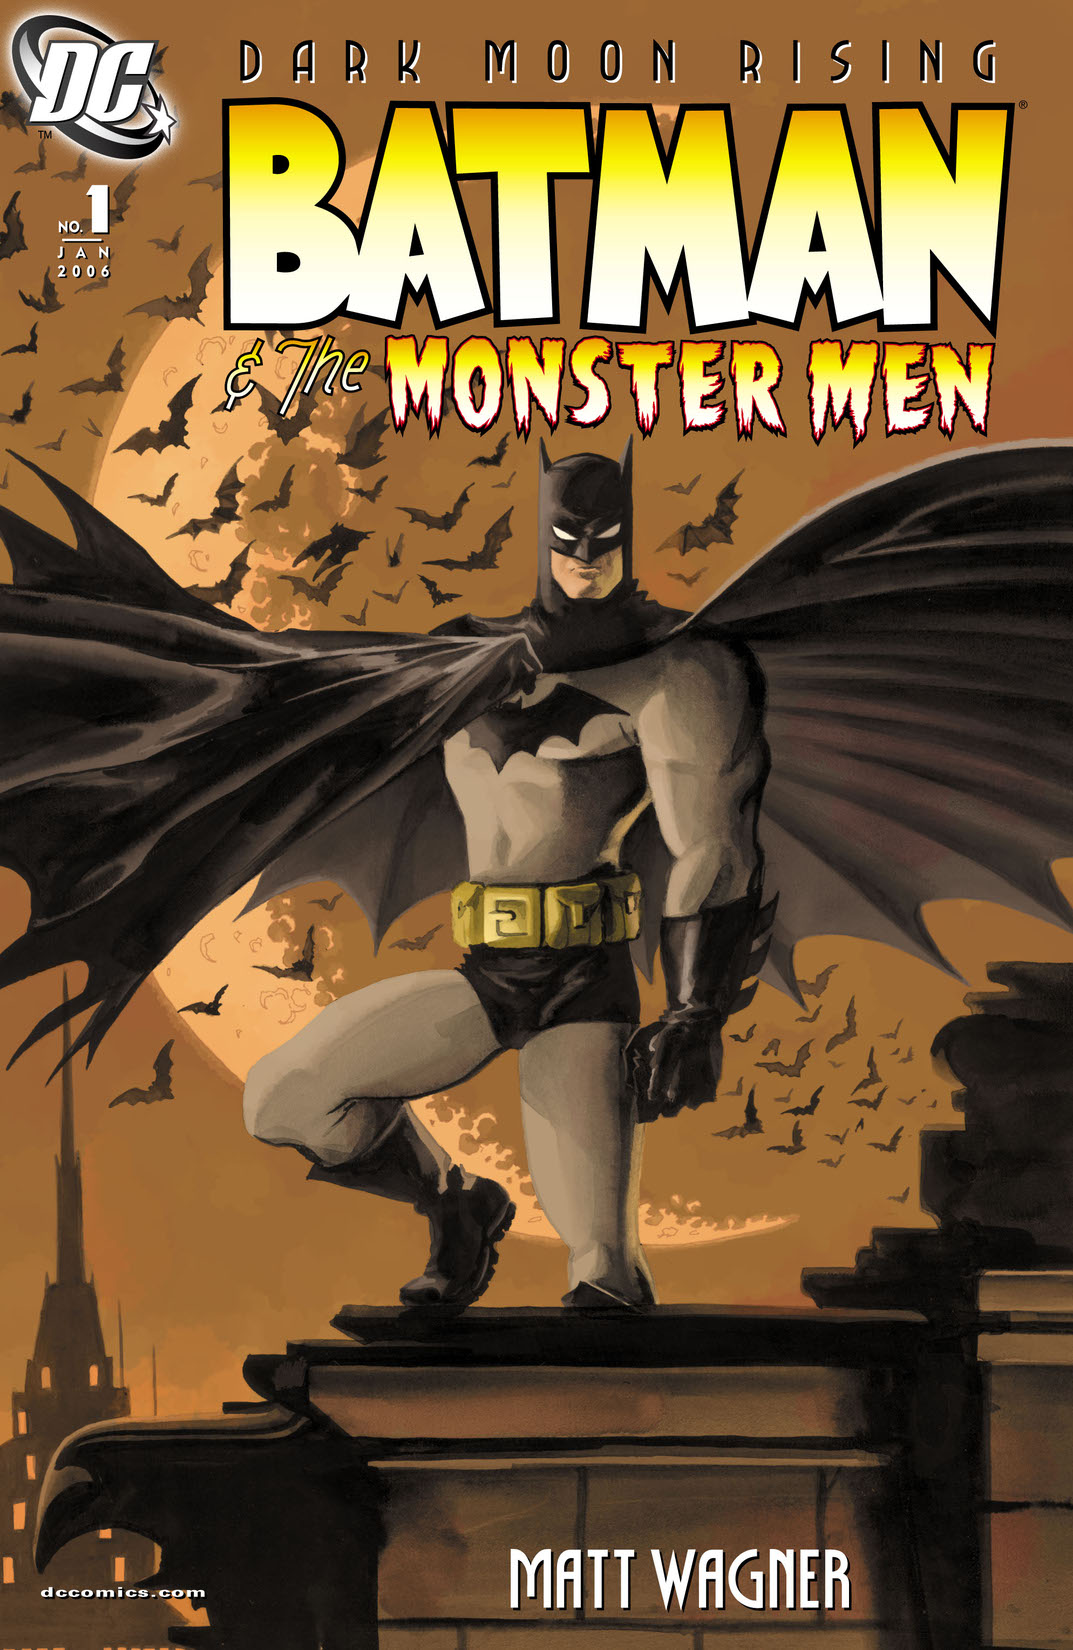 Batman and the Monster Men #1 preview images